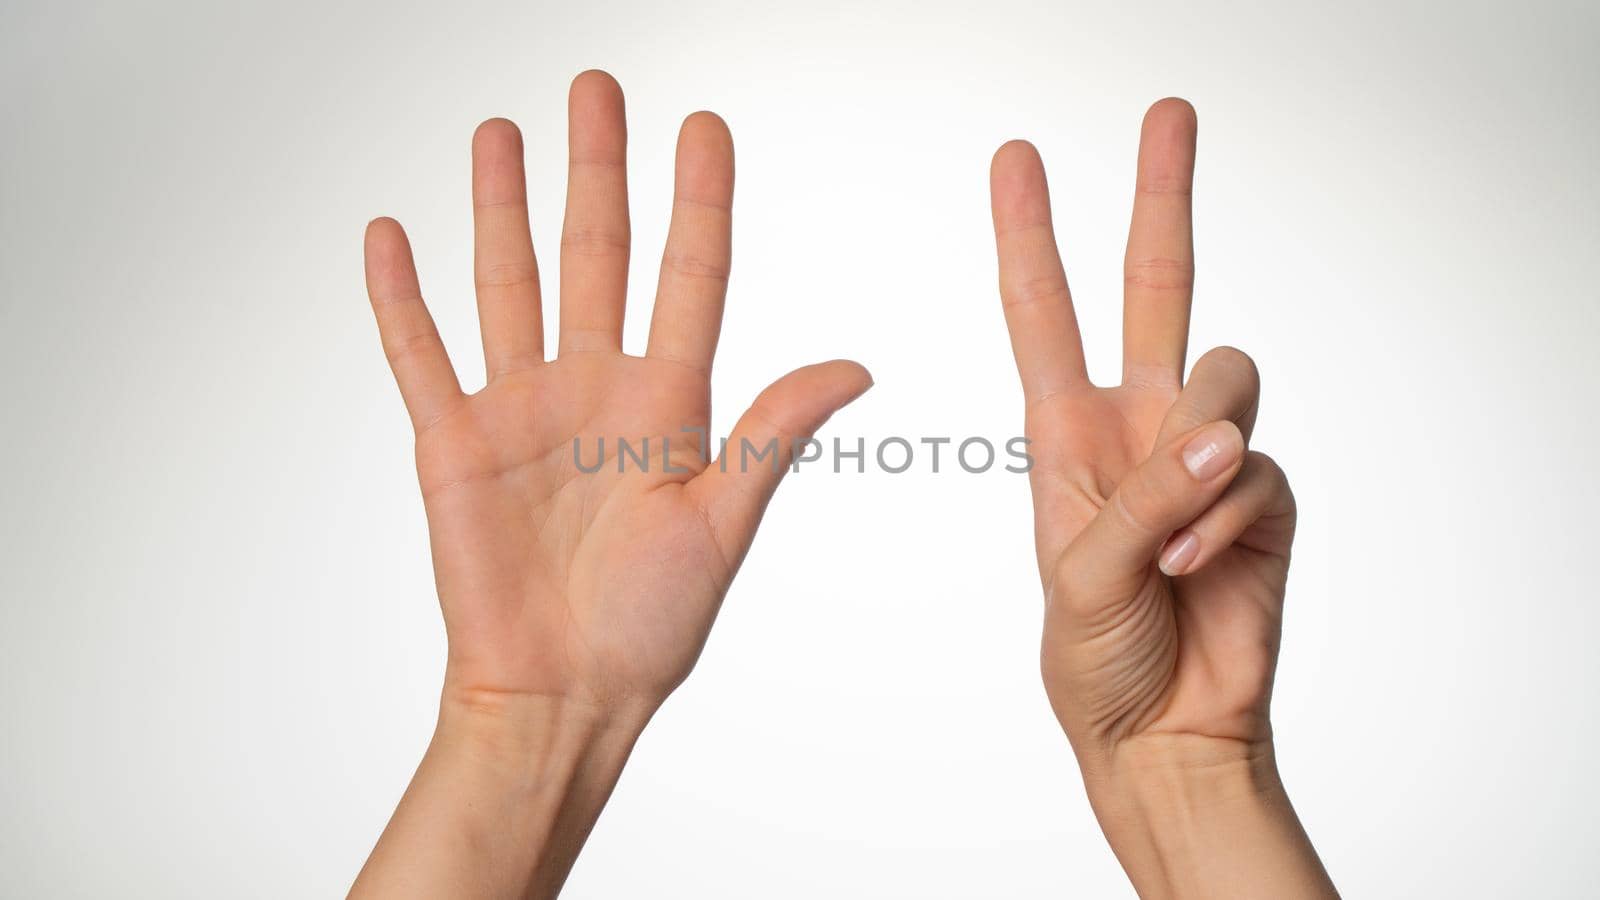 Women's hands gesture counting on fingers 7 palm side. High quality photo